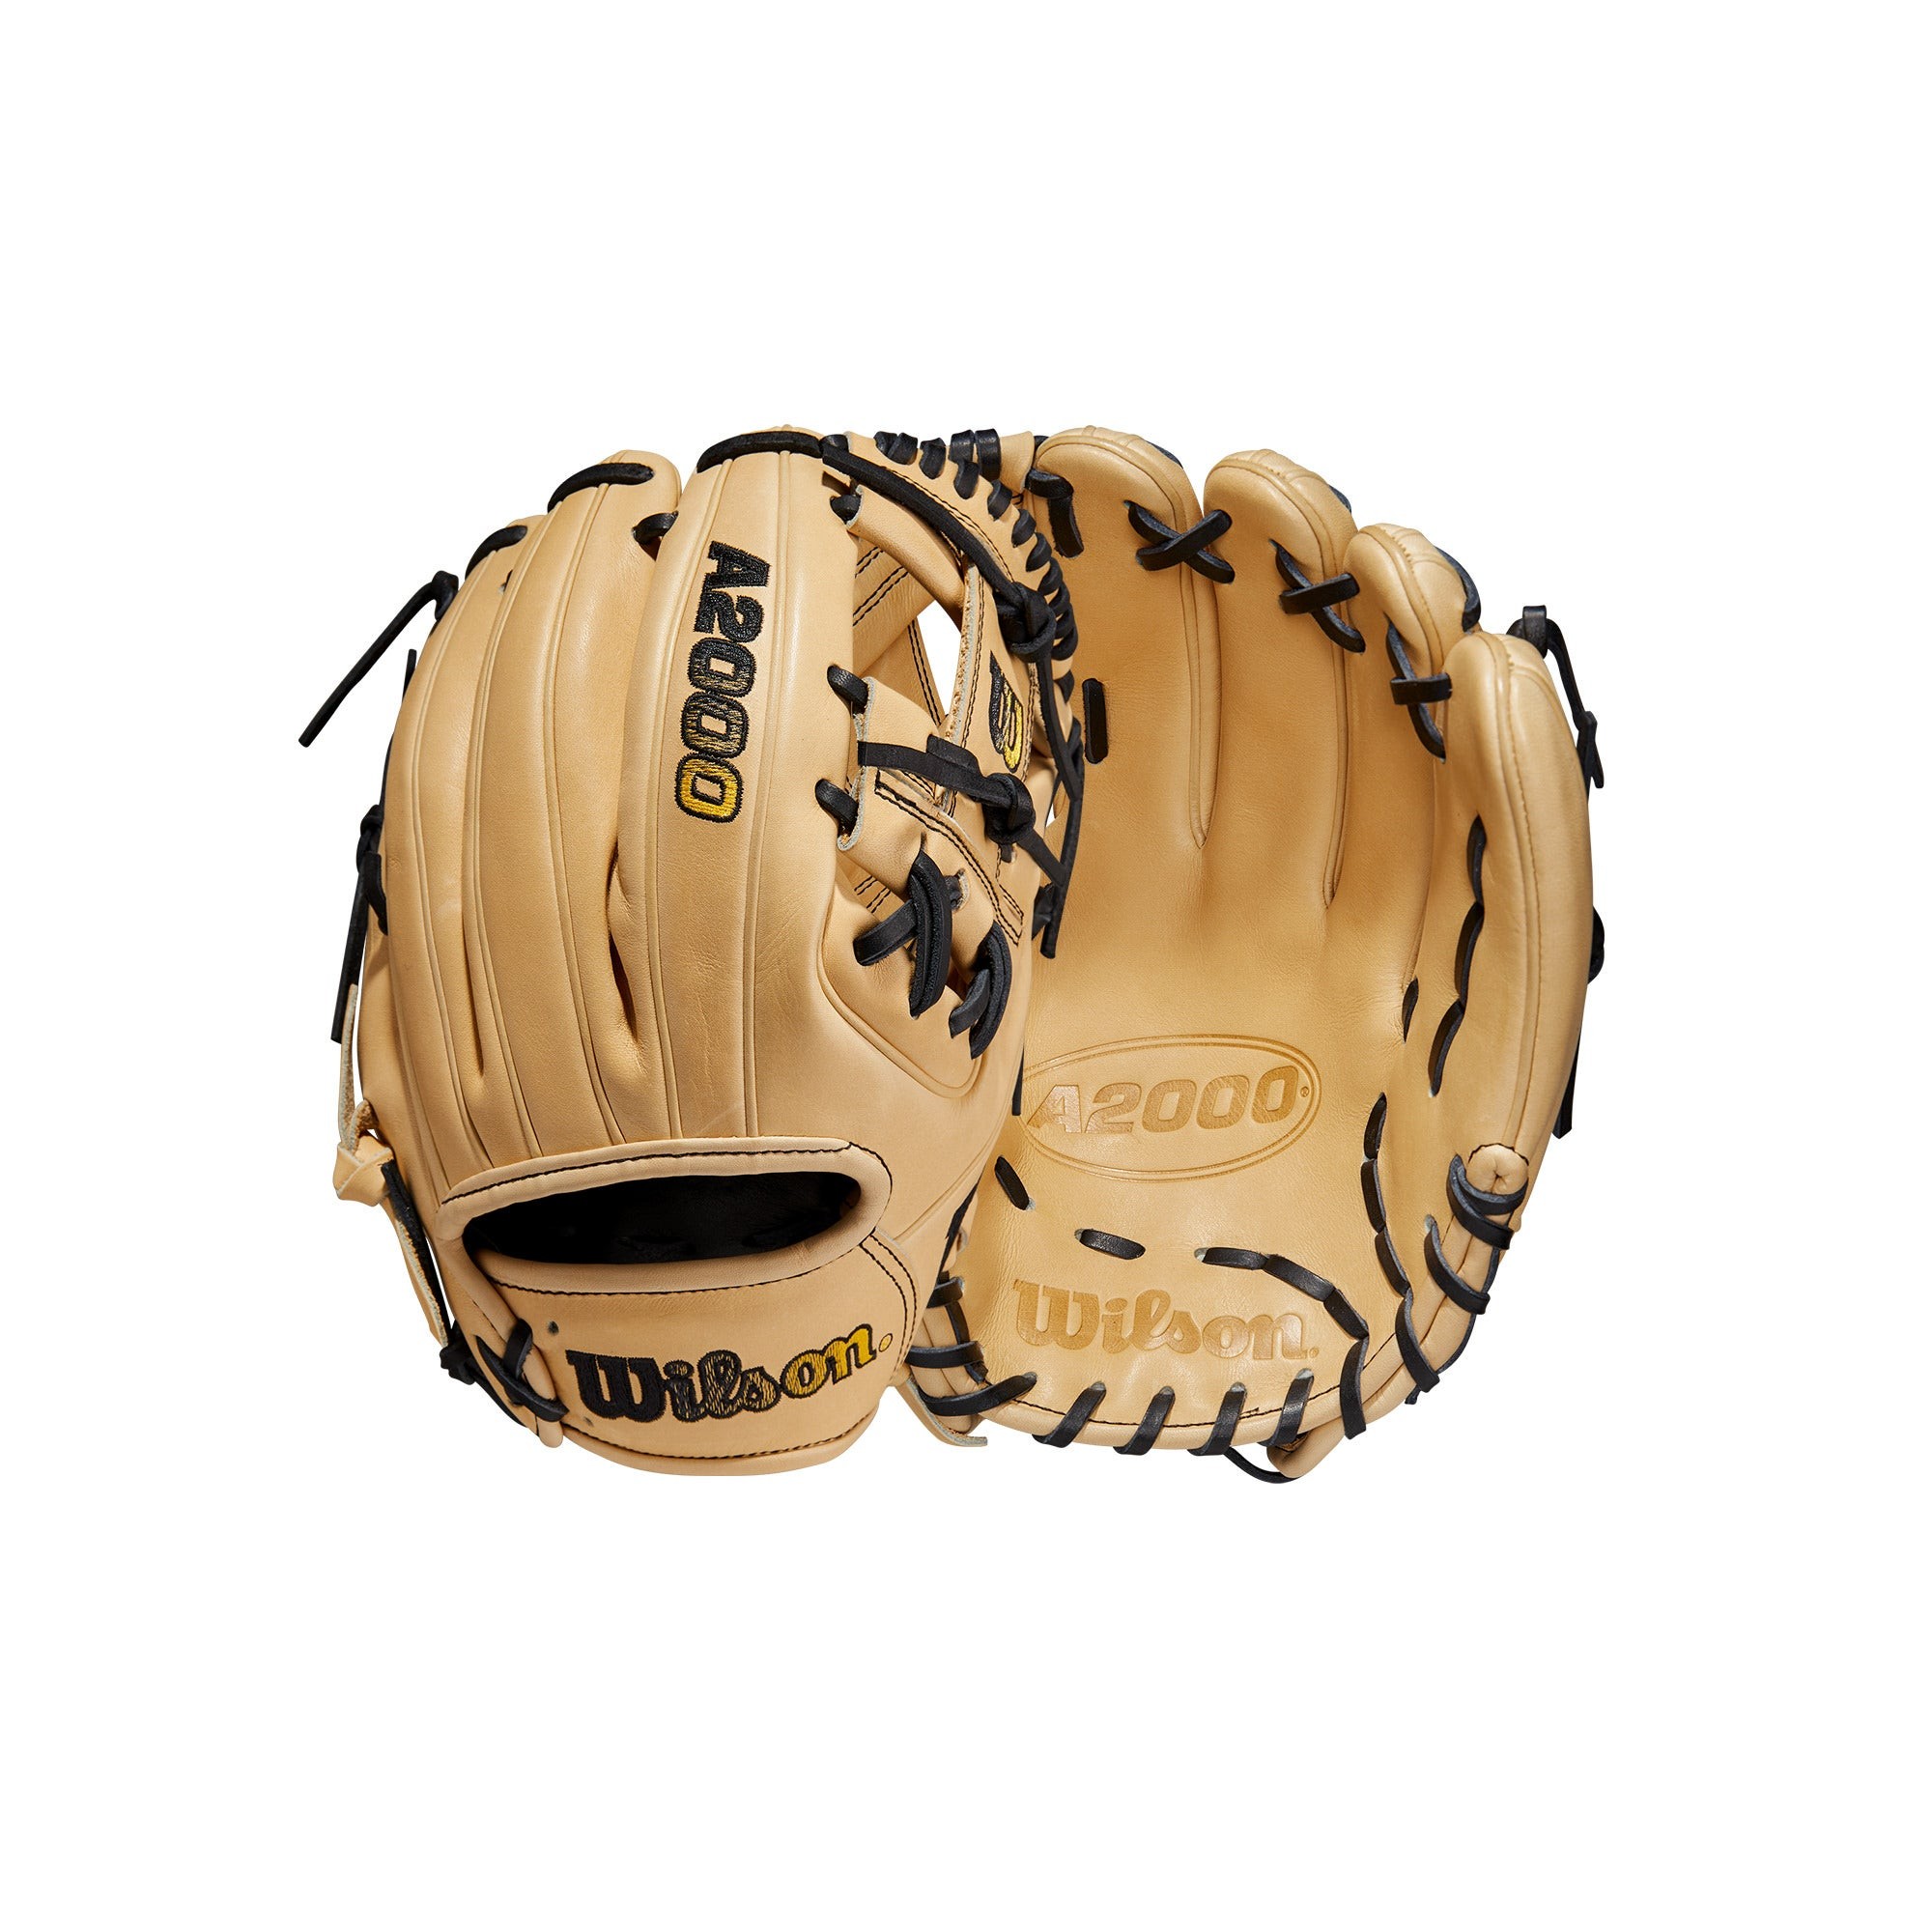 A2000 1786 11.5" Infield Baseball Glove - Right Hand Throwers